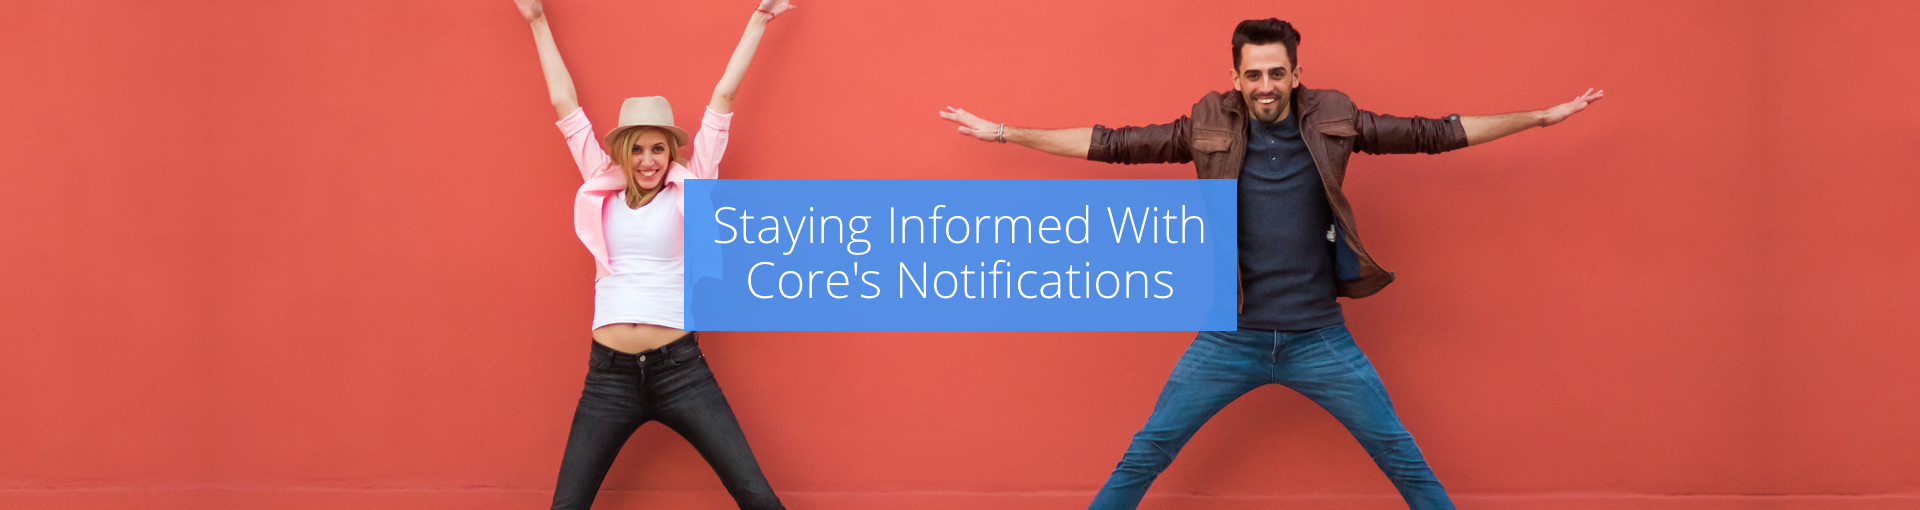 Staying Informed With CORE's Notifications Featured Image